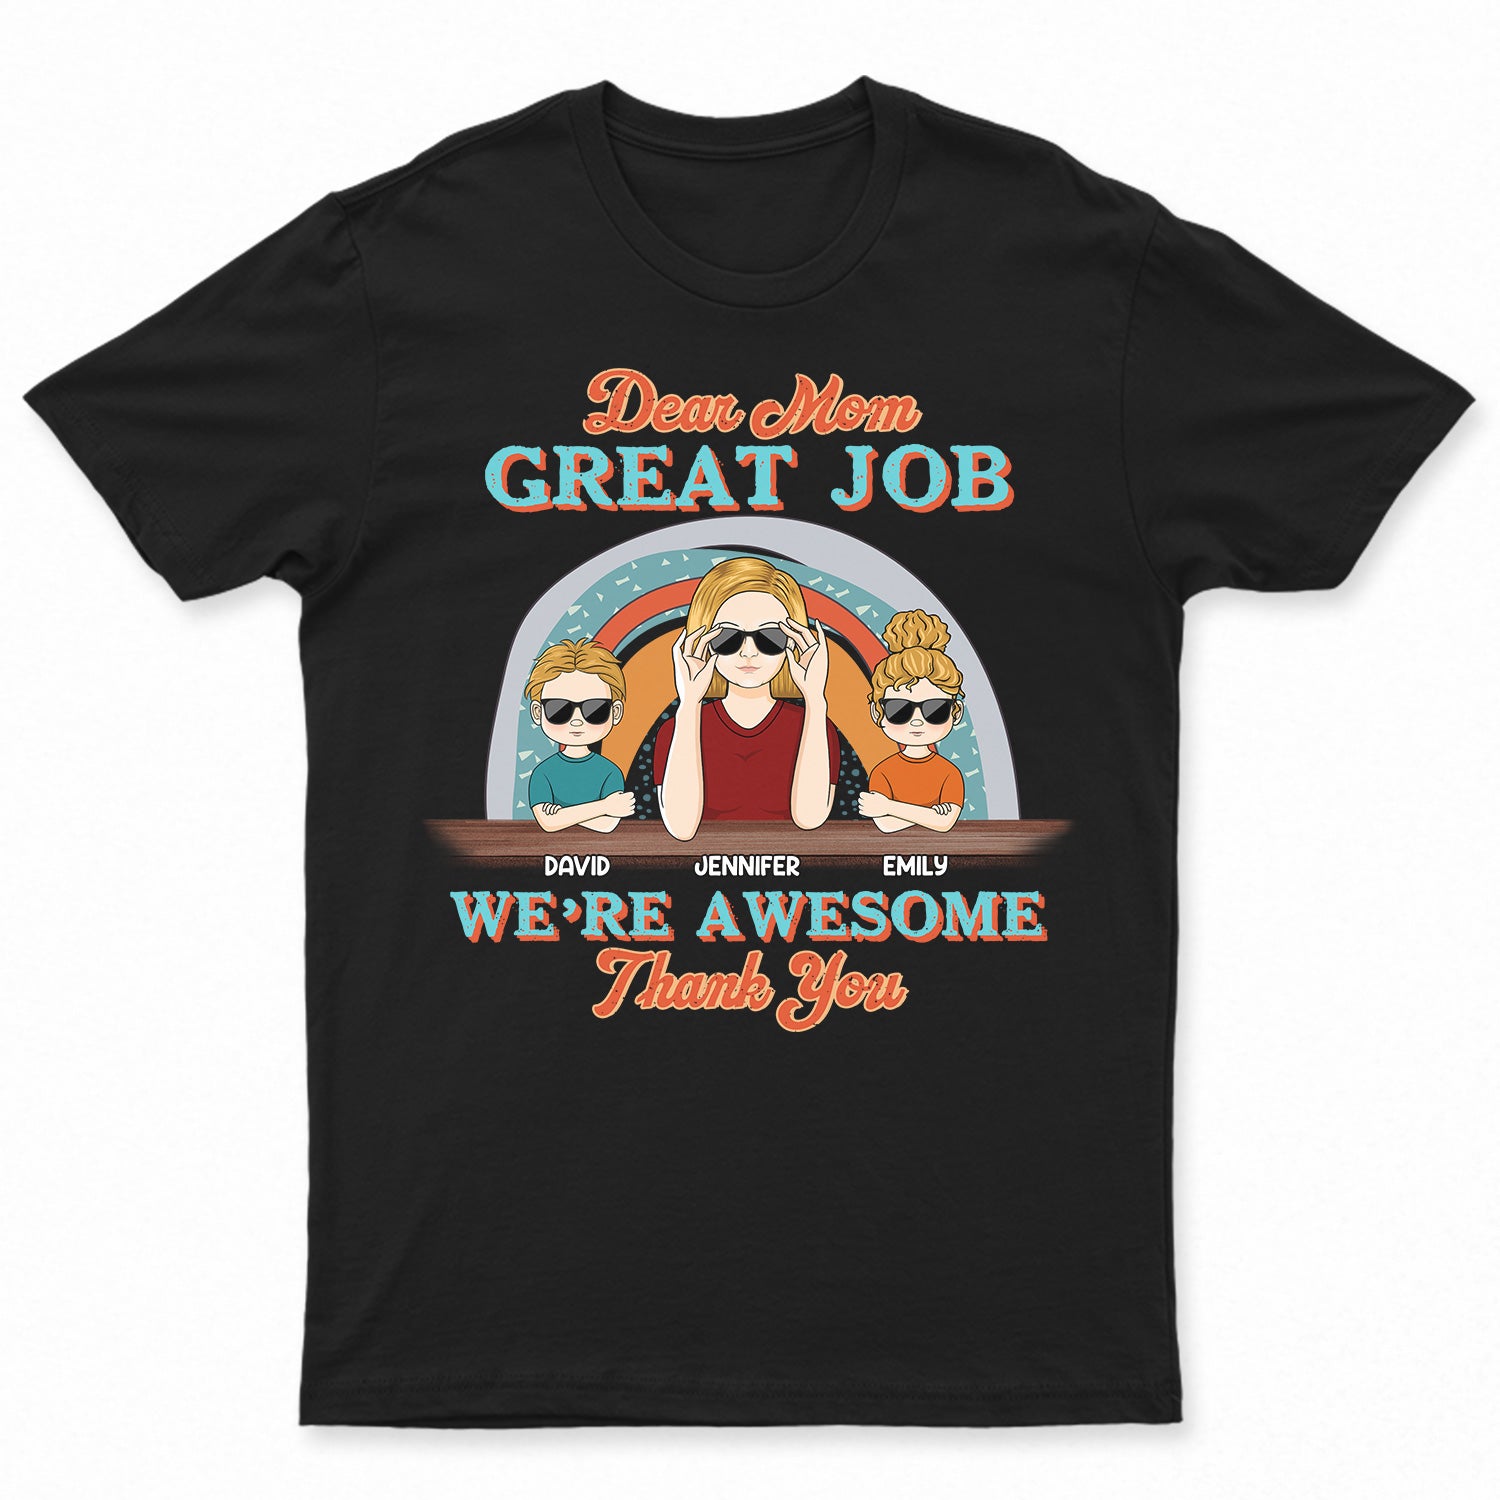 Dear Mom Great Job I'm Awesome - Gift For Mom - Personalized Custom T Shirt